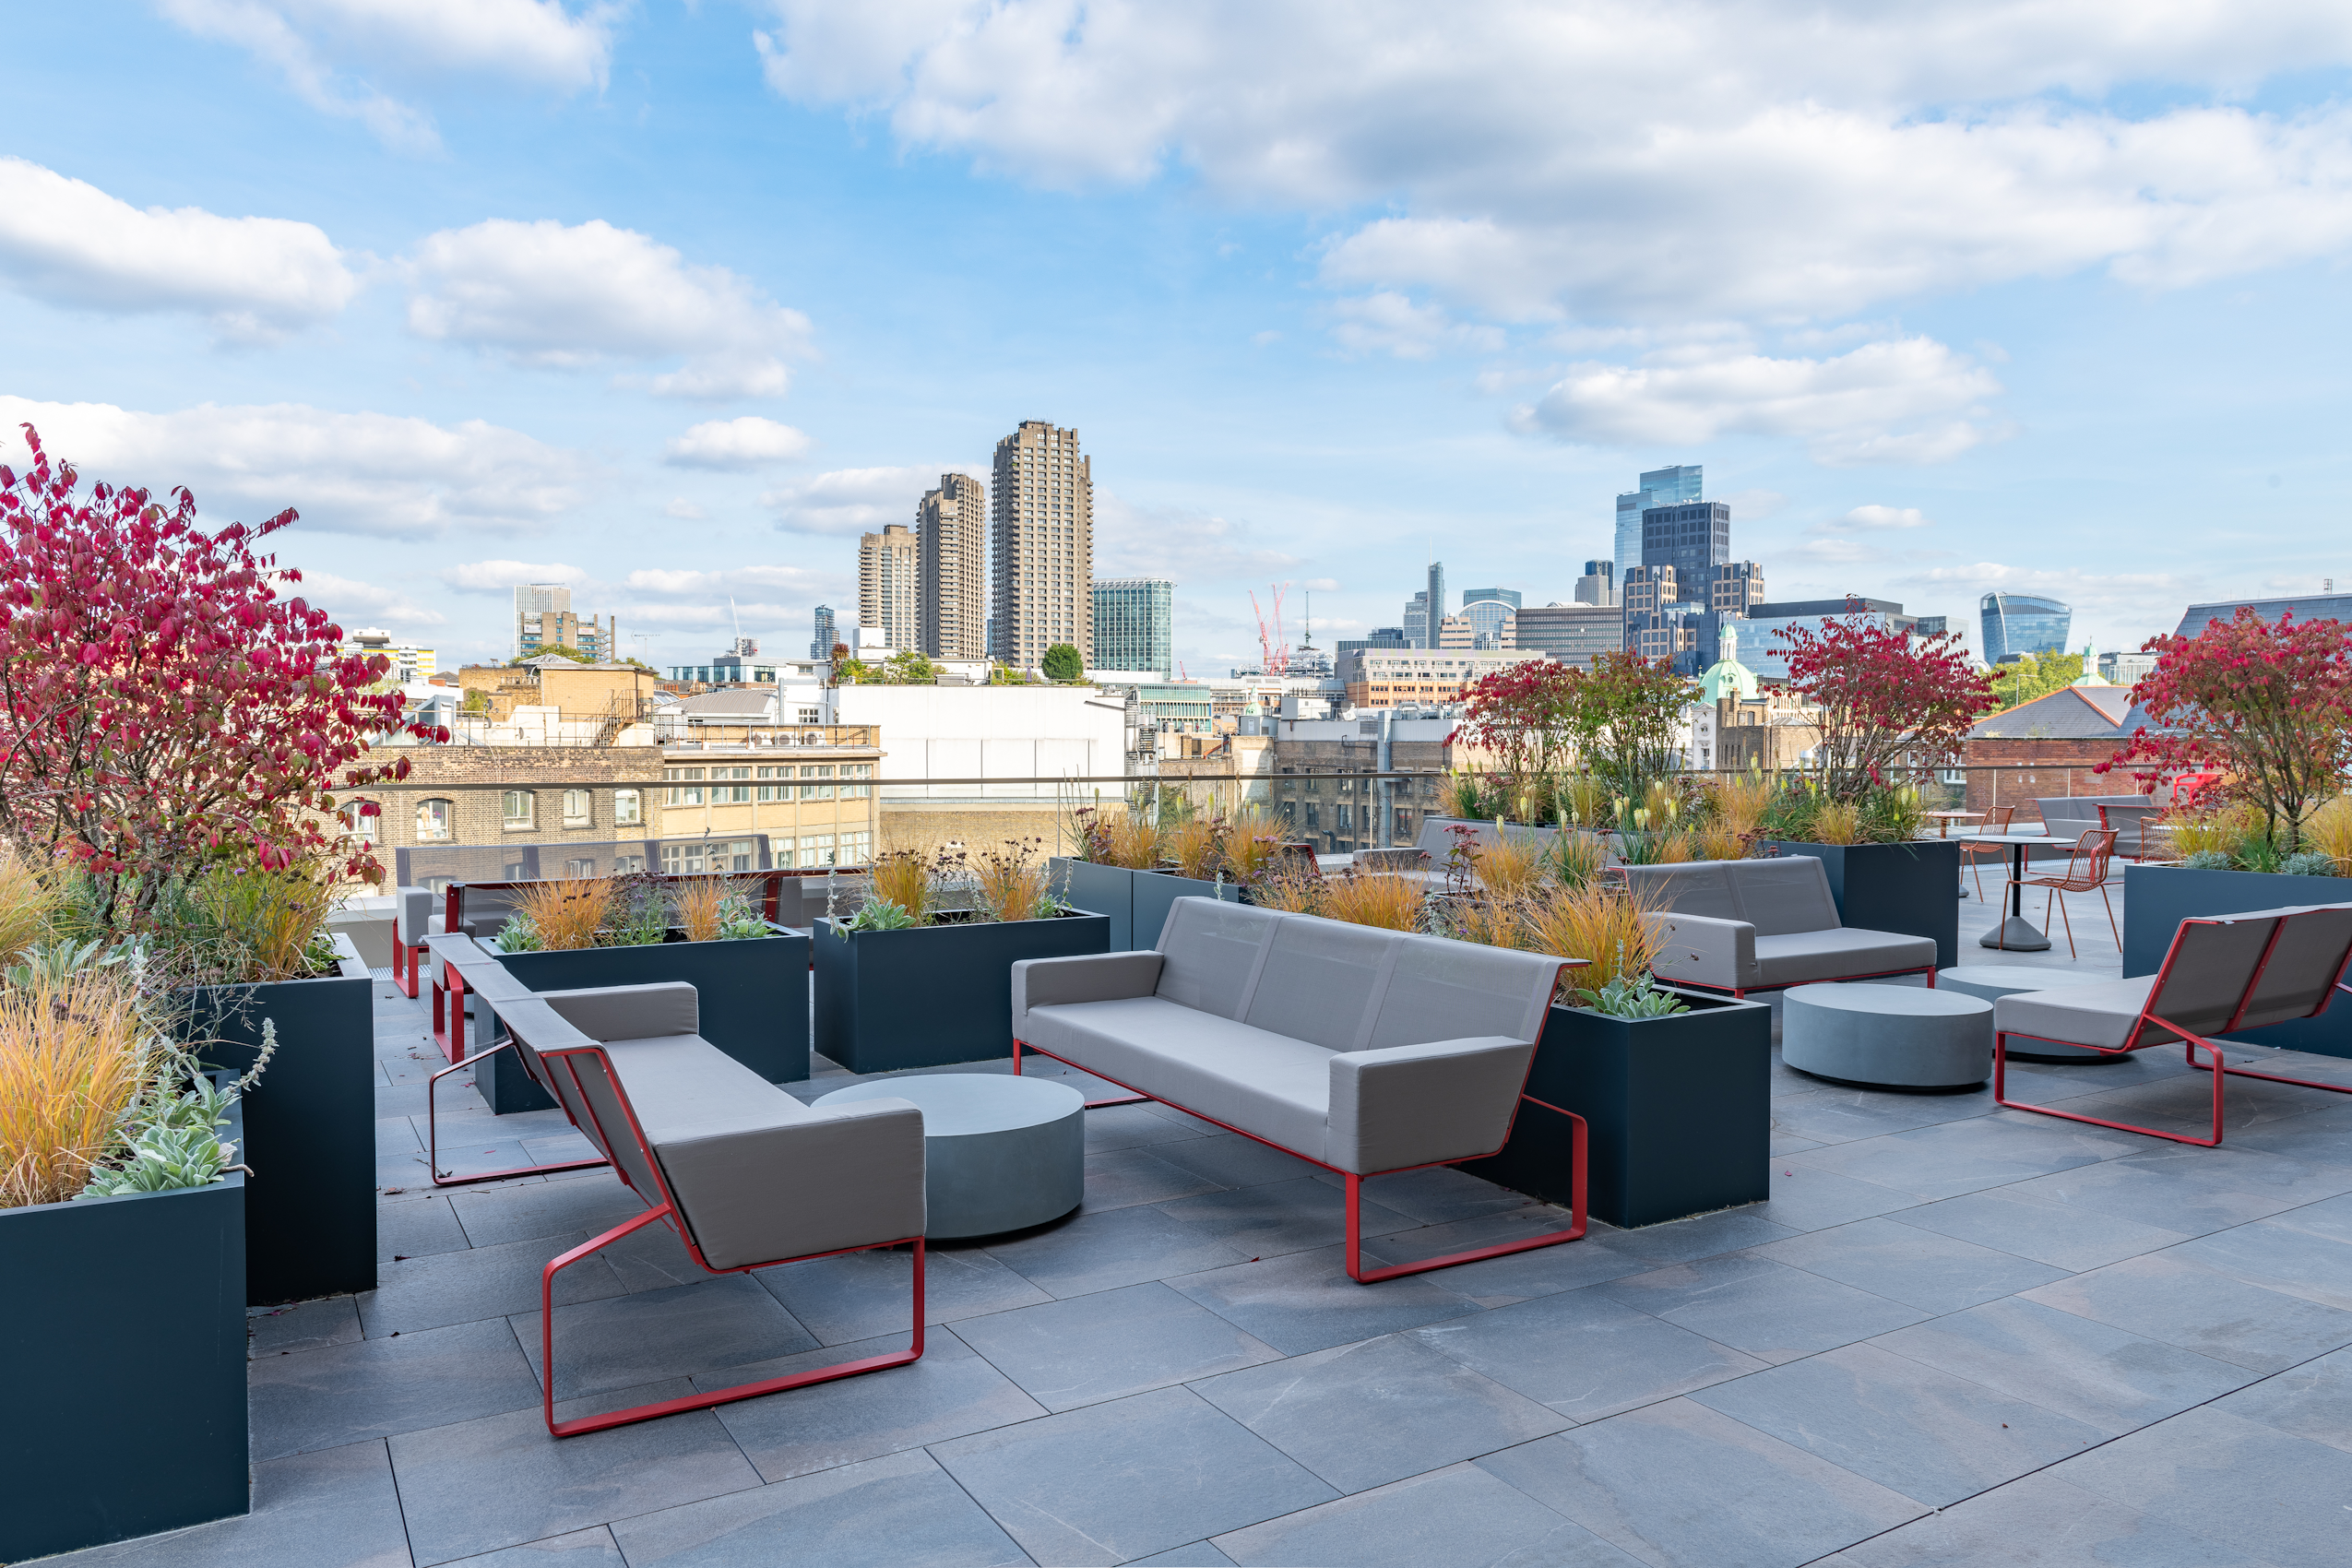 Service access on roof terraces